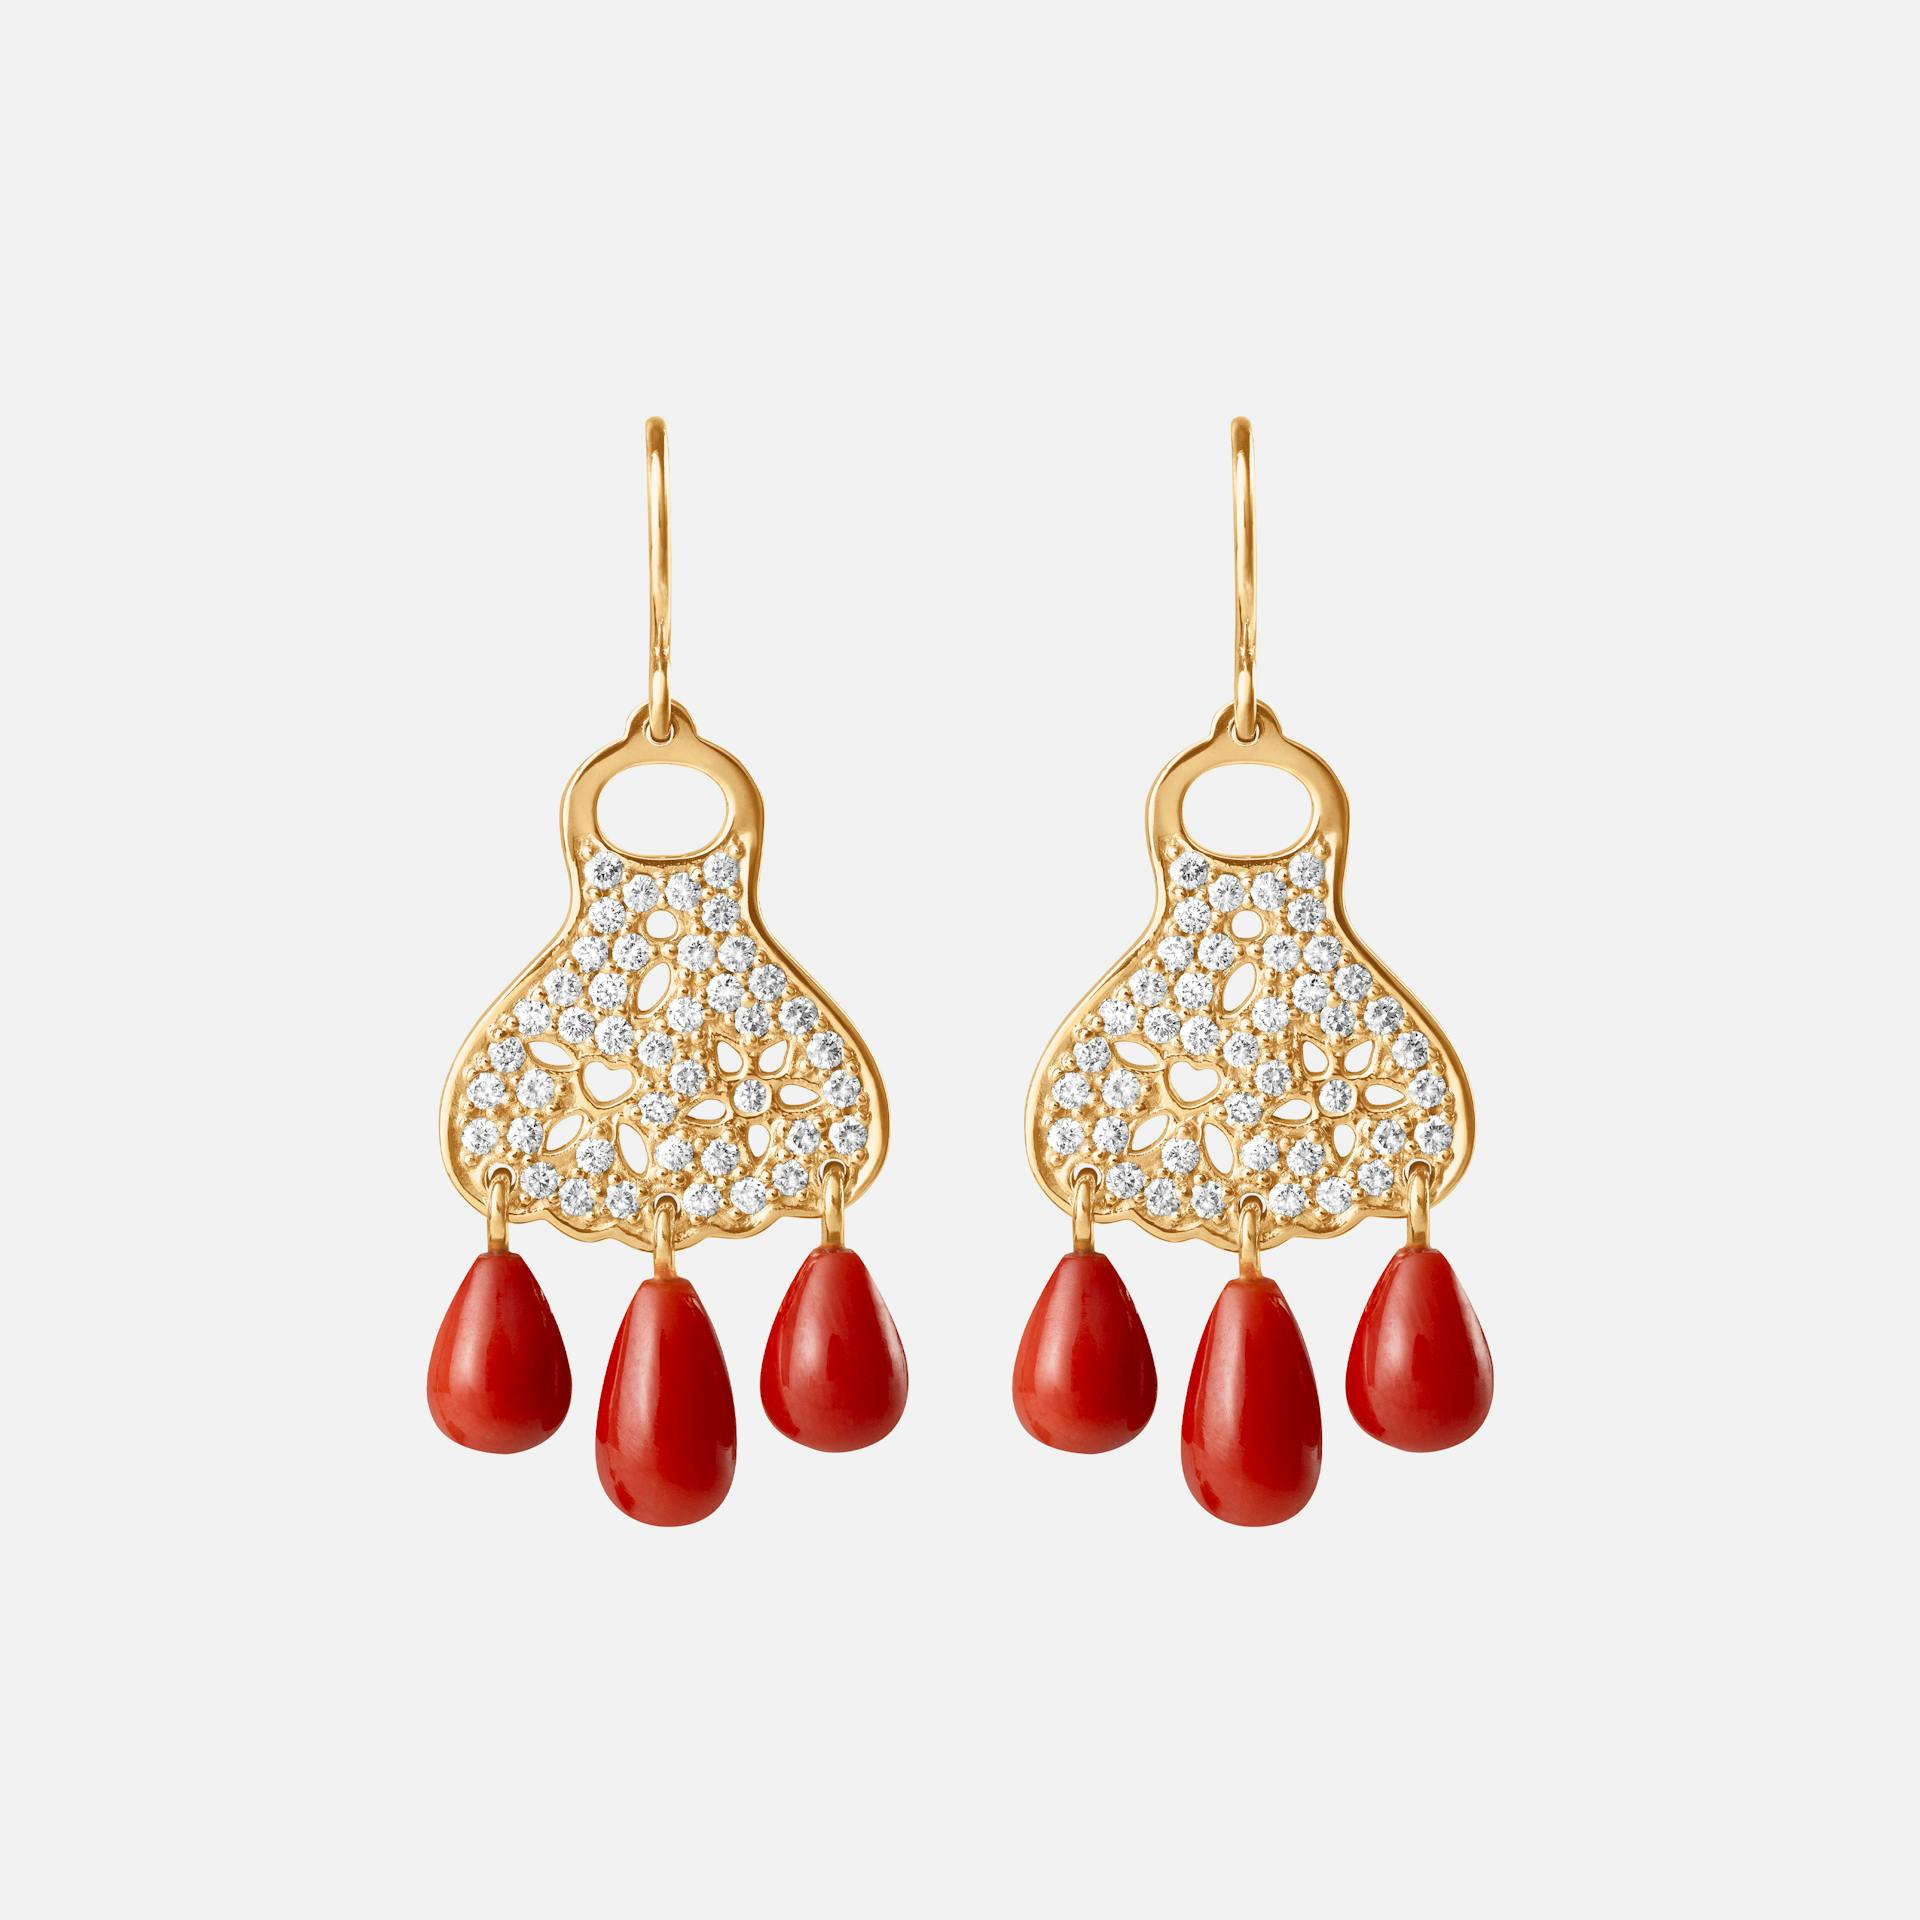 Lace Earrings in Yellow Gold with Diamonds & Red Coral   |  Ole Lynggaard Copenhagen